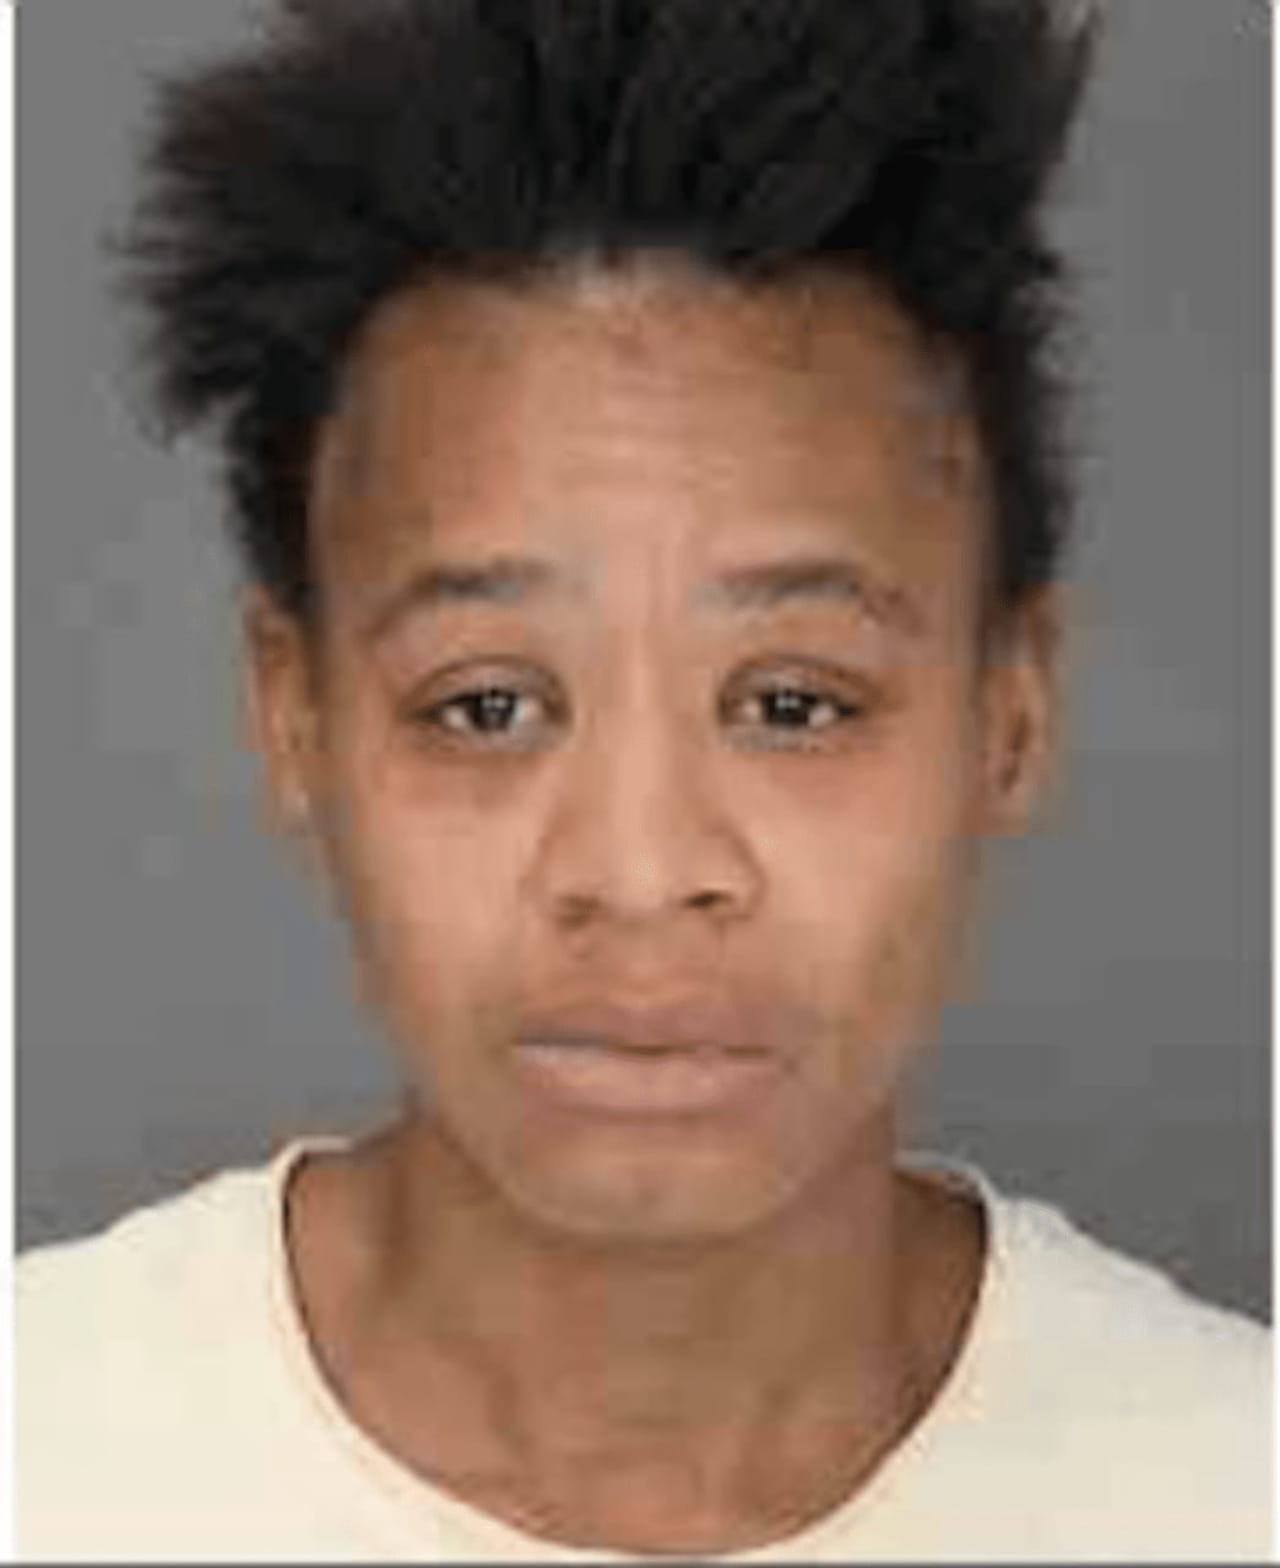 Shenettra Franklin is wanted by the Ramapo Police Department on multiple charges.